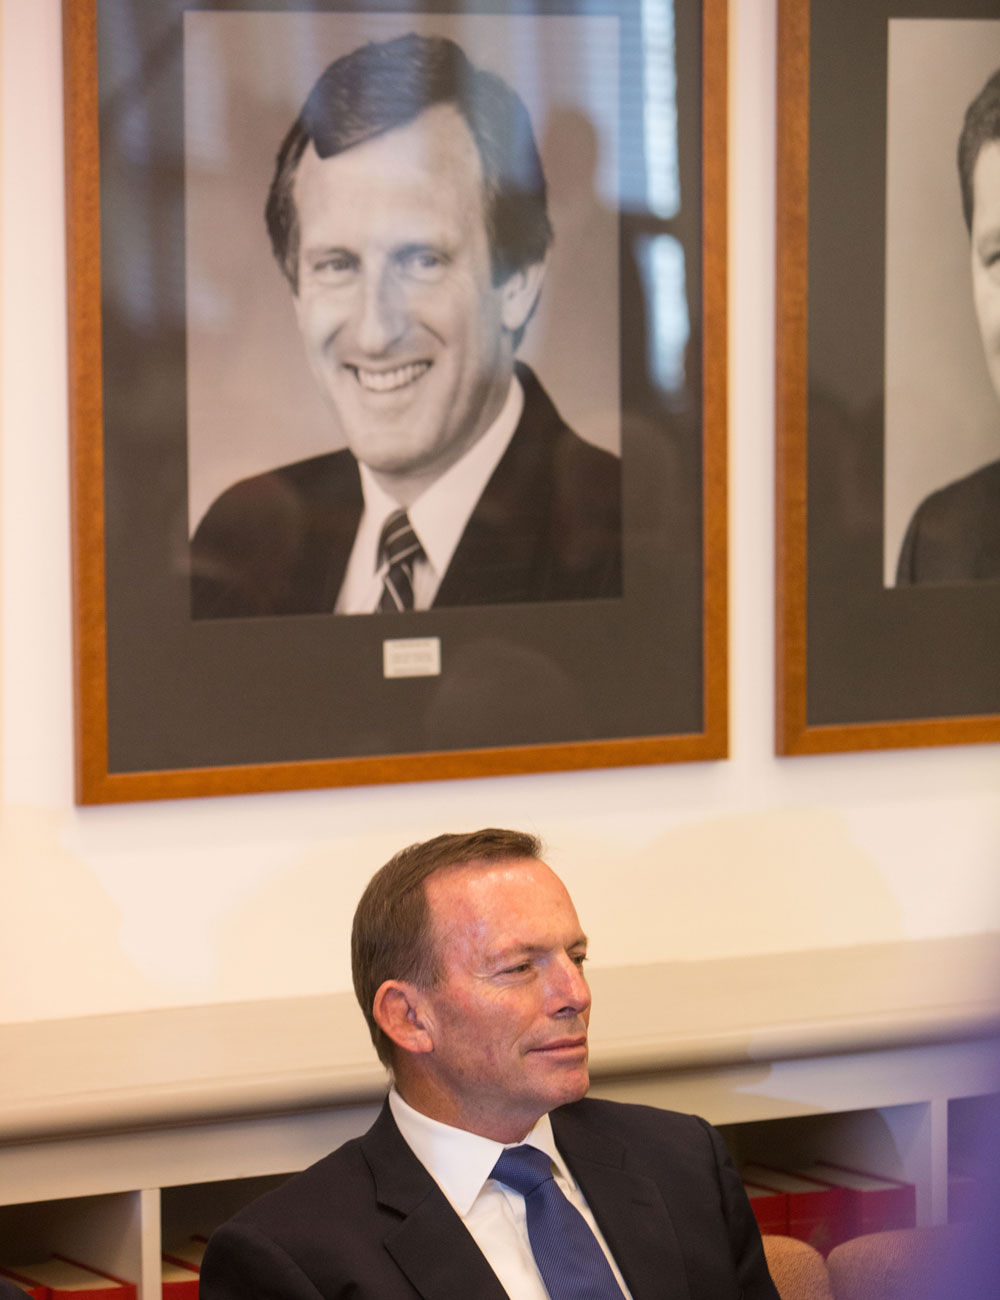 Former PM Tony Abbott at the back of the joint party meeting. Photo: AAP